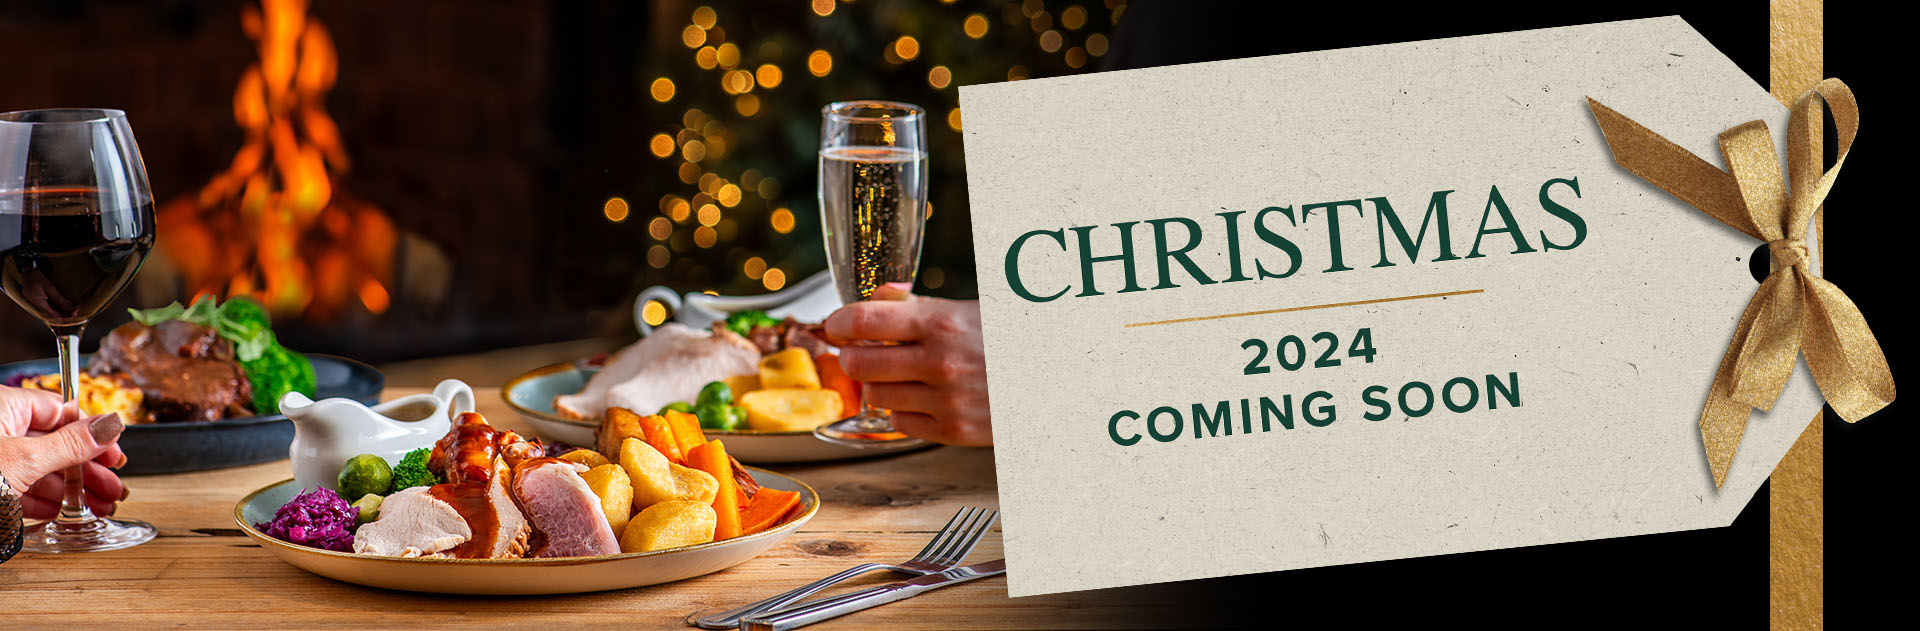 Christmas at The Hare and Hounds 